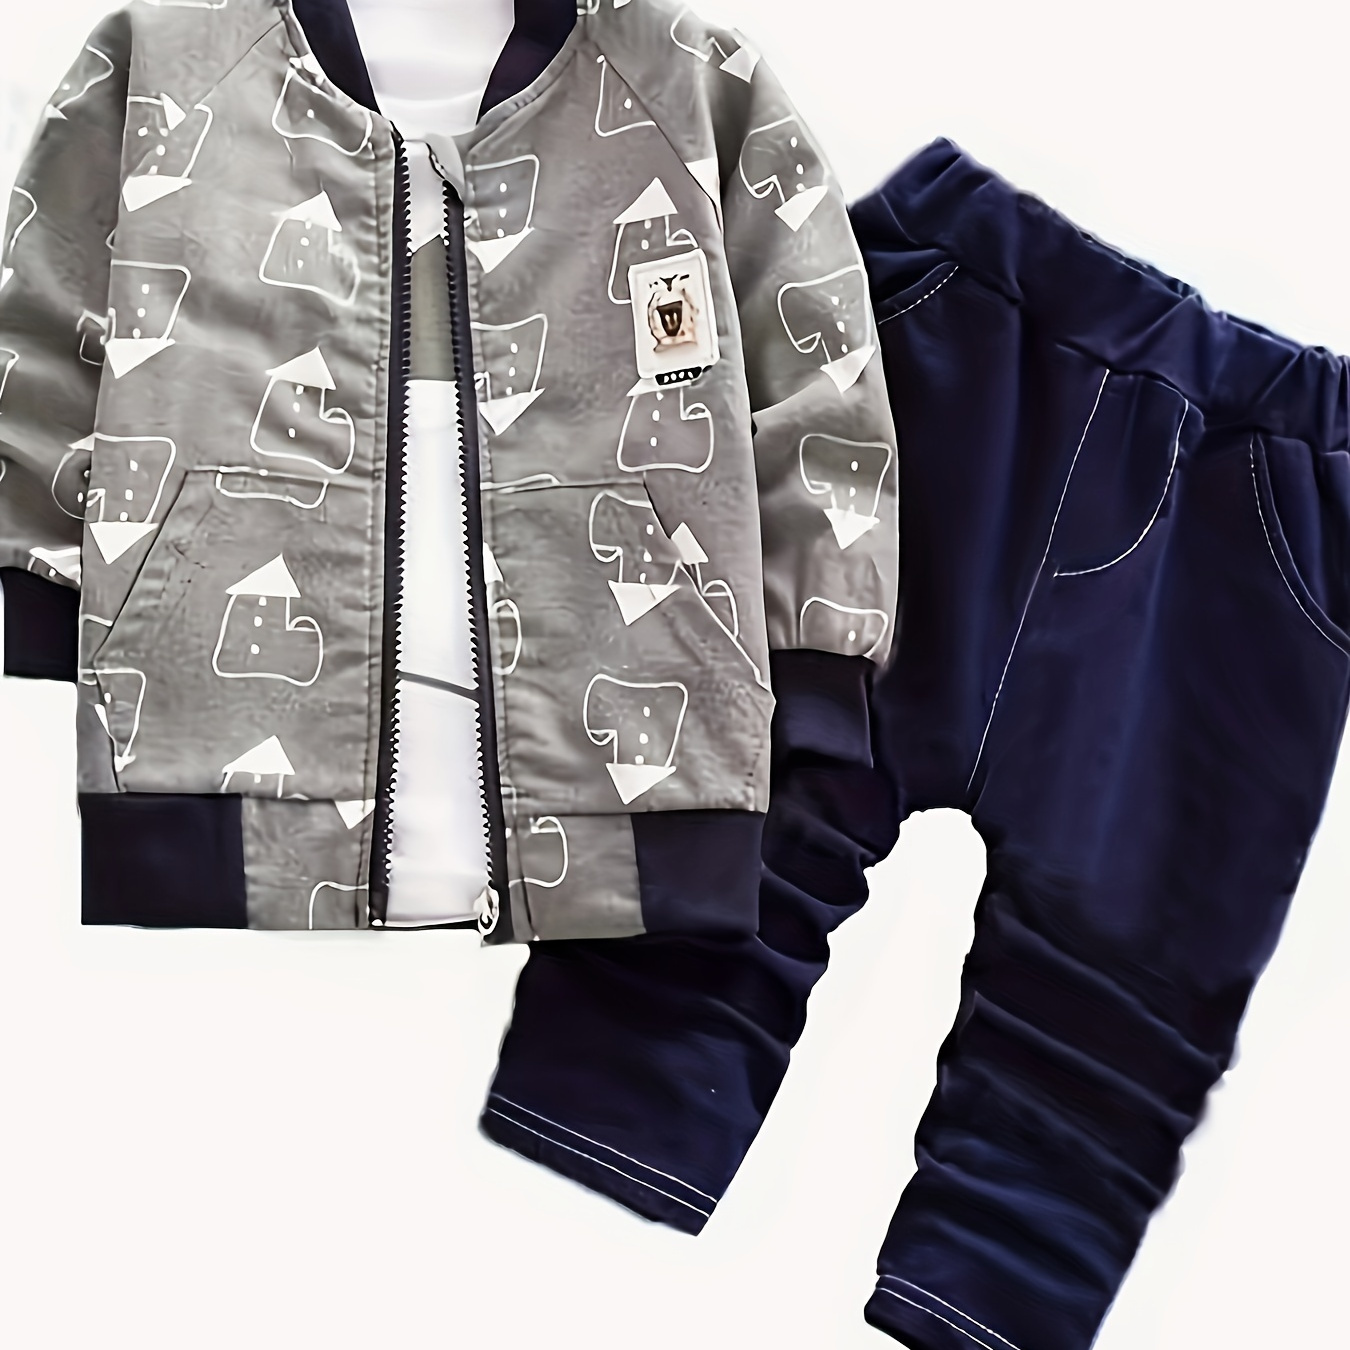 

Boys Cute Cartoon Print Long Sleeve Casual Crew Neck Sweatshirt & Zip Up Coat & Jeans Set, Toddler Baby's Spring And Autumn 3pcs Outfits